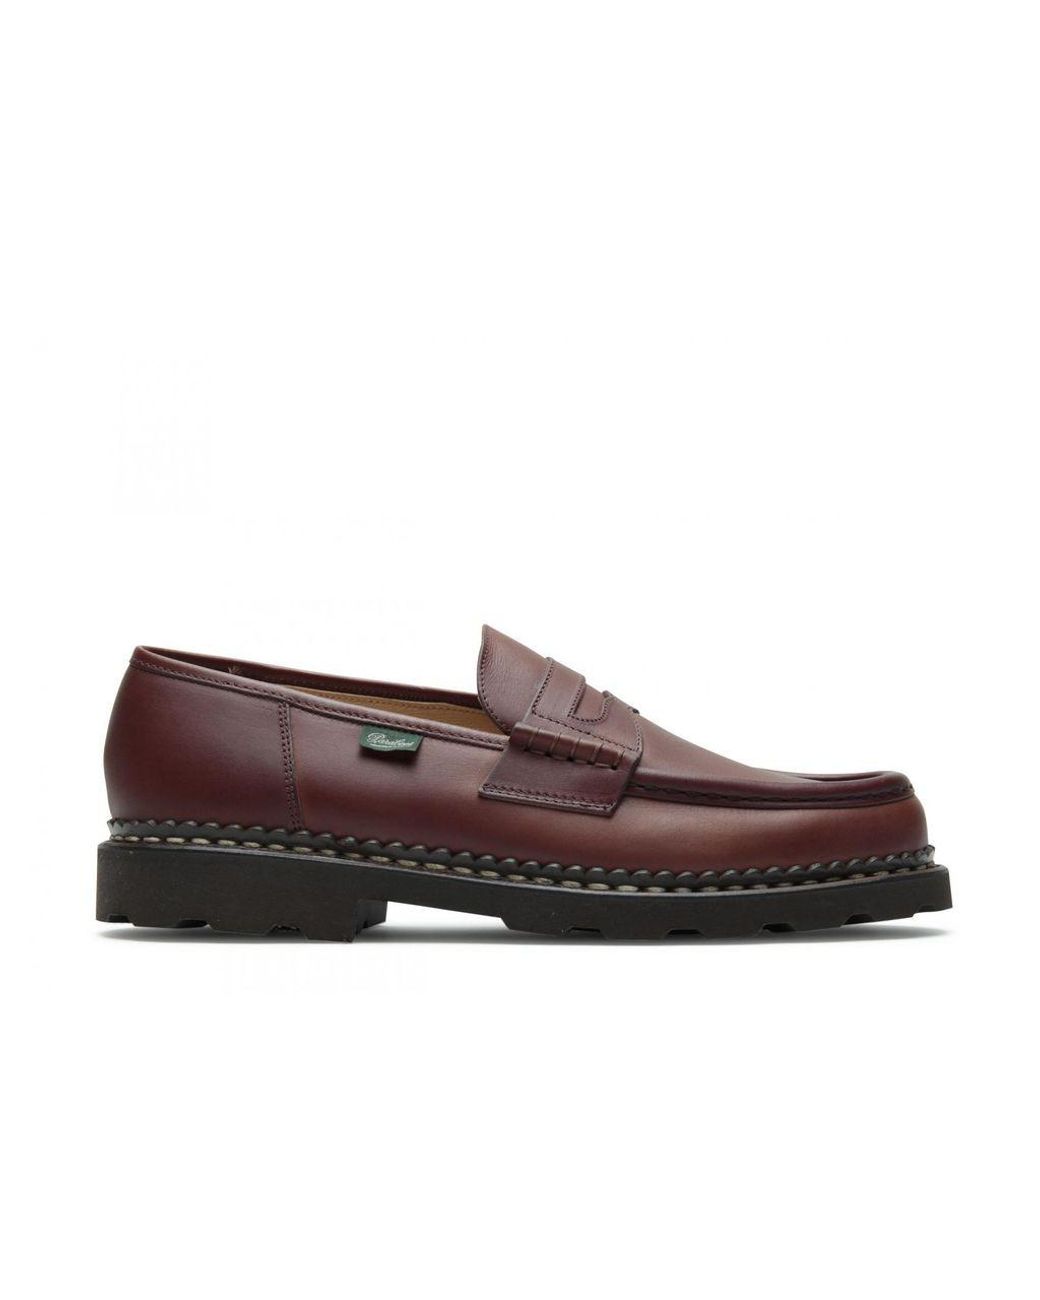 Paraboot Leather Reims Loafer - Marche - Marron Lis Marron in Brown for ...